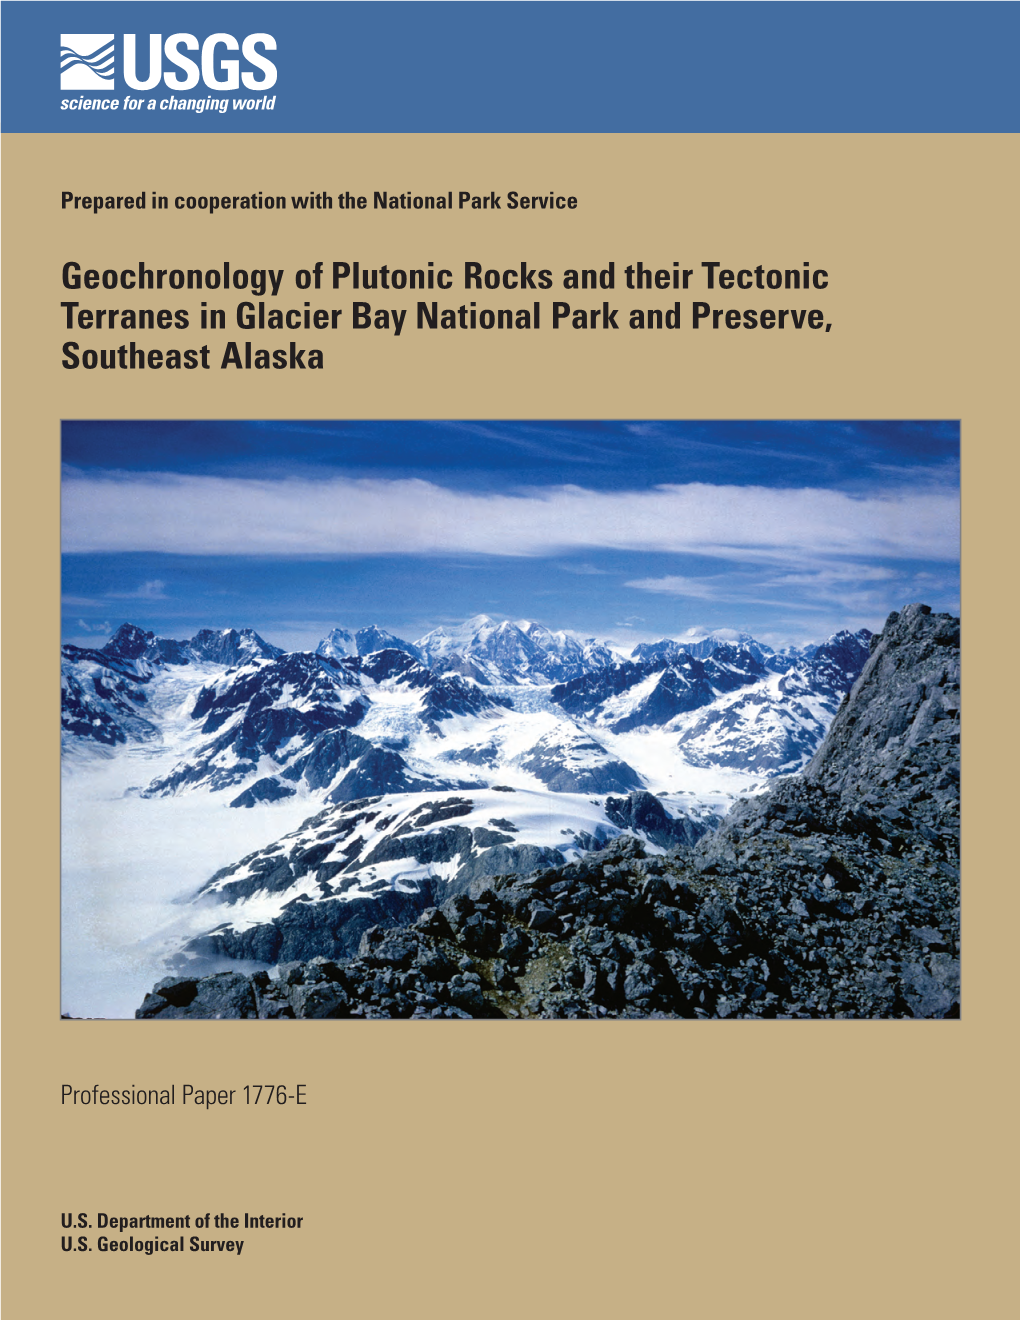 Geochronology of Plutonic Rocks and Their Tectonic Terranes in Glacier Bay National Park and Preserve, Southeast Alaska